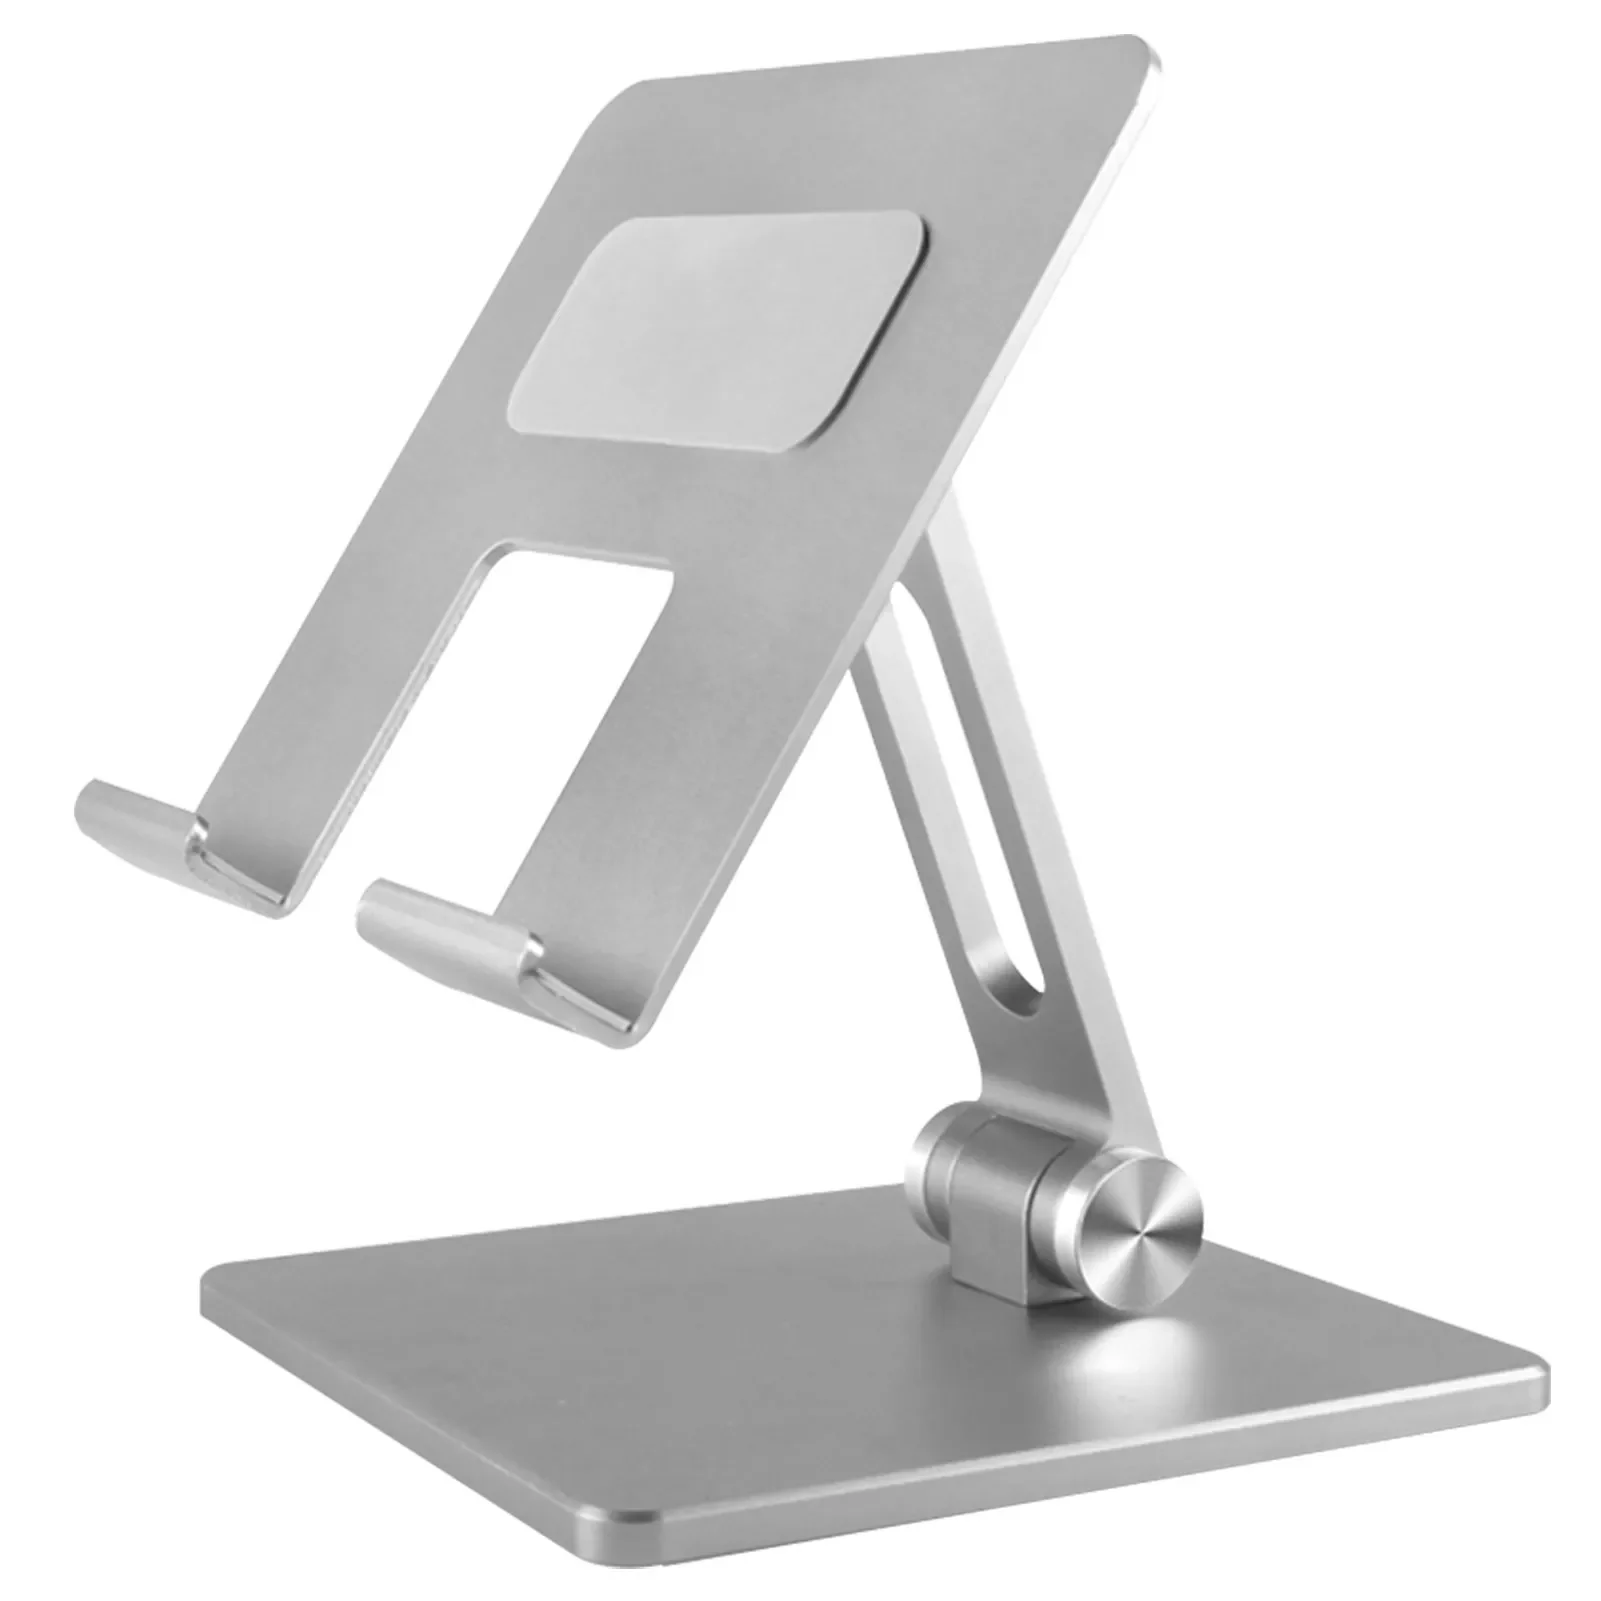 Tablet Stand 180 Degree Adjustable Phone Stand For Desk  Foldable Desktop Stand Phone Dock Tablet Stand Holder